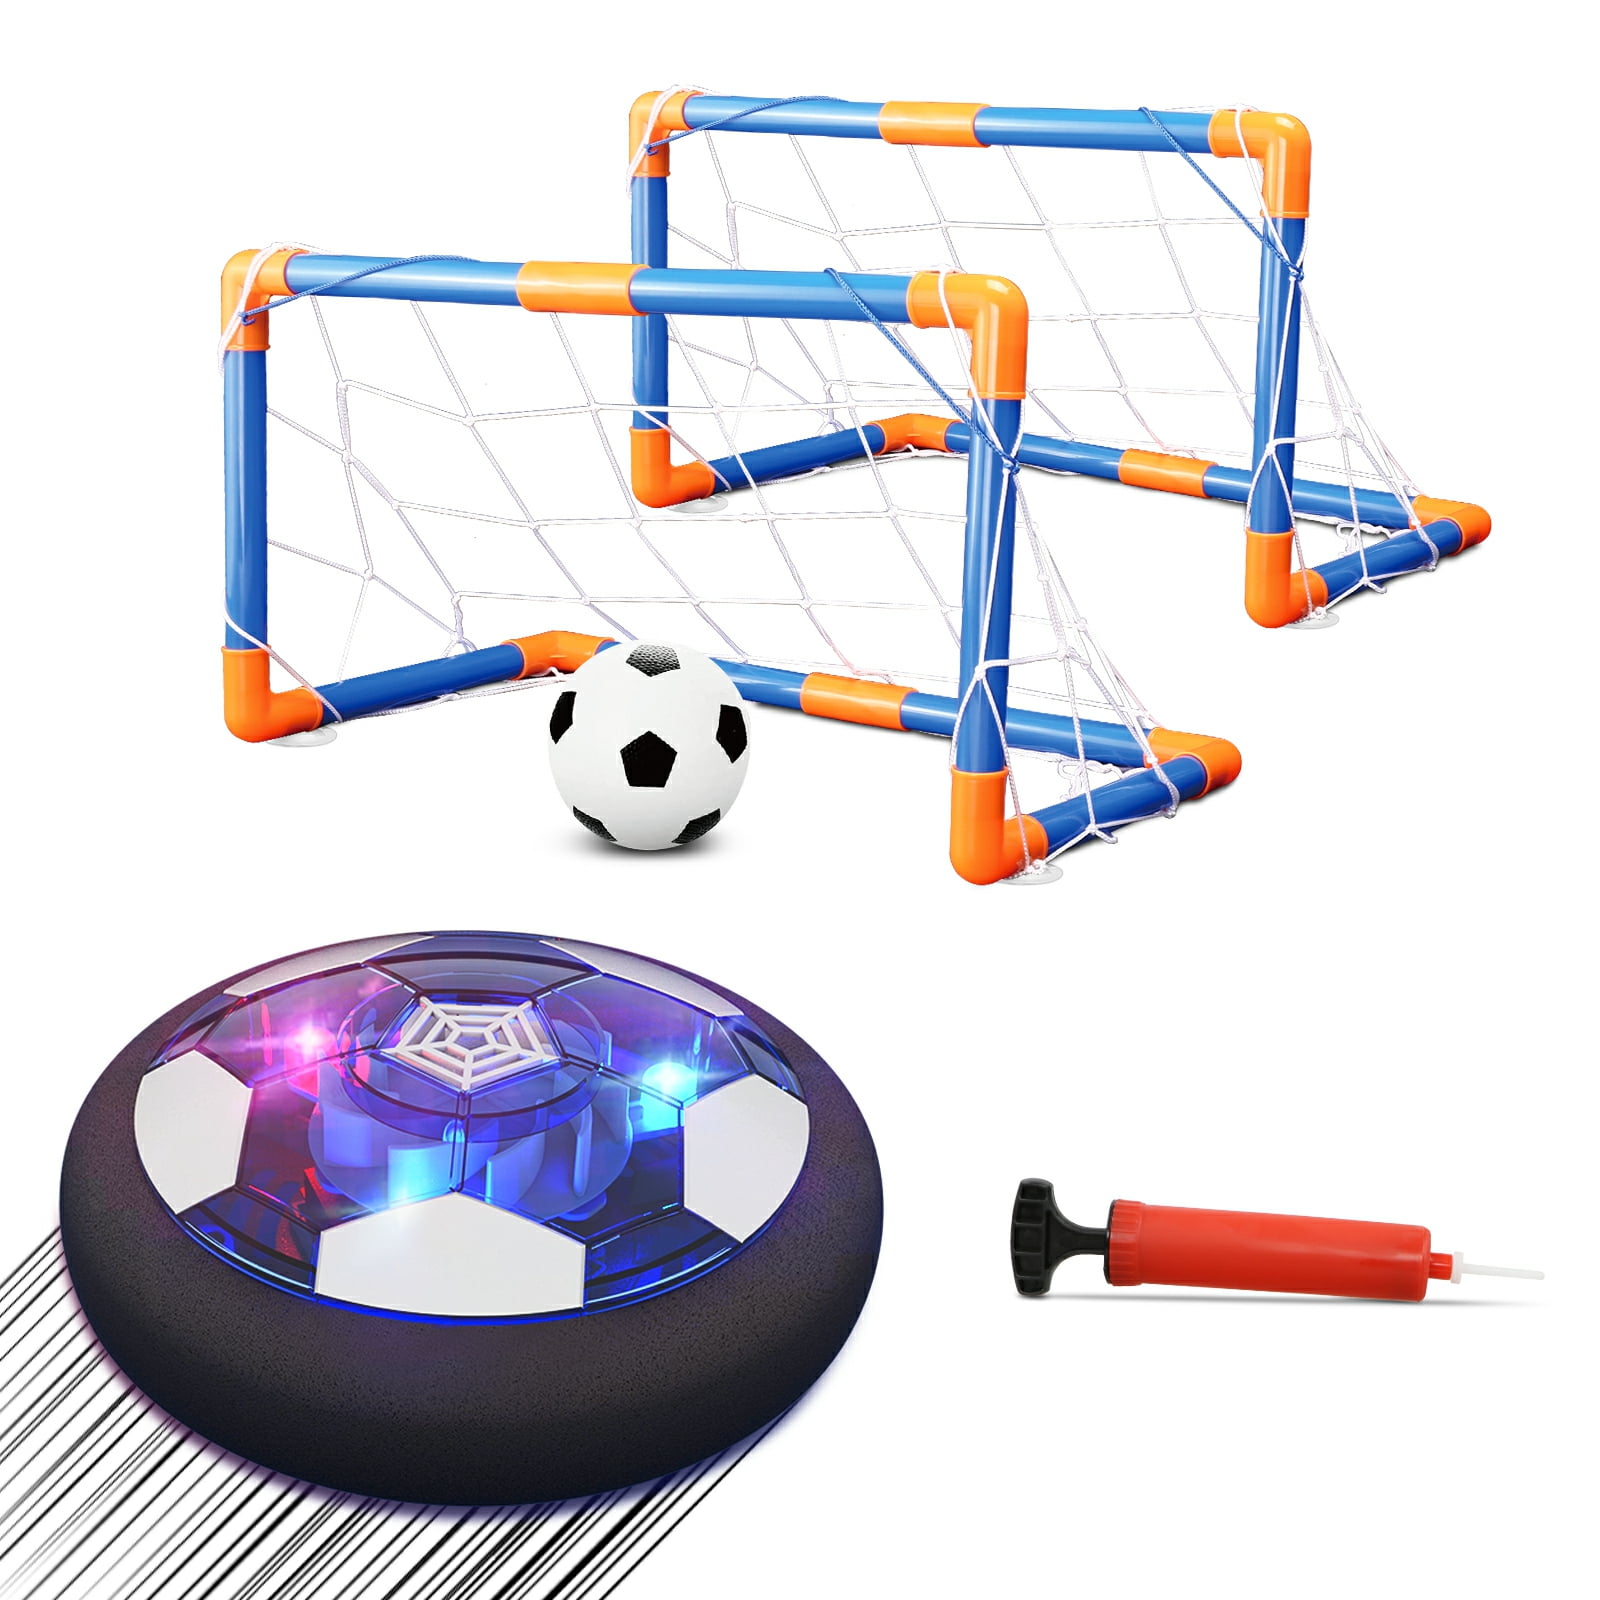 Hover Ball Toys for 4-10 Year Old Boys Top Indoor or Outdoor Kids Sports Games 